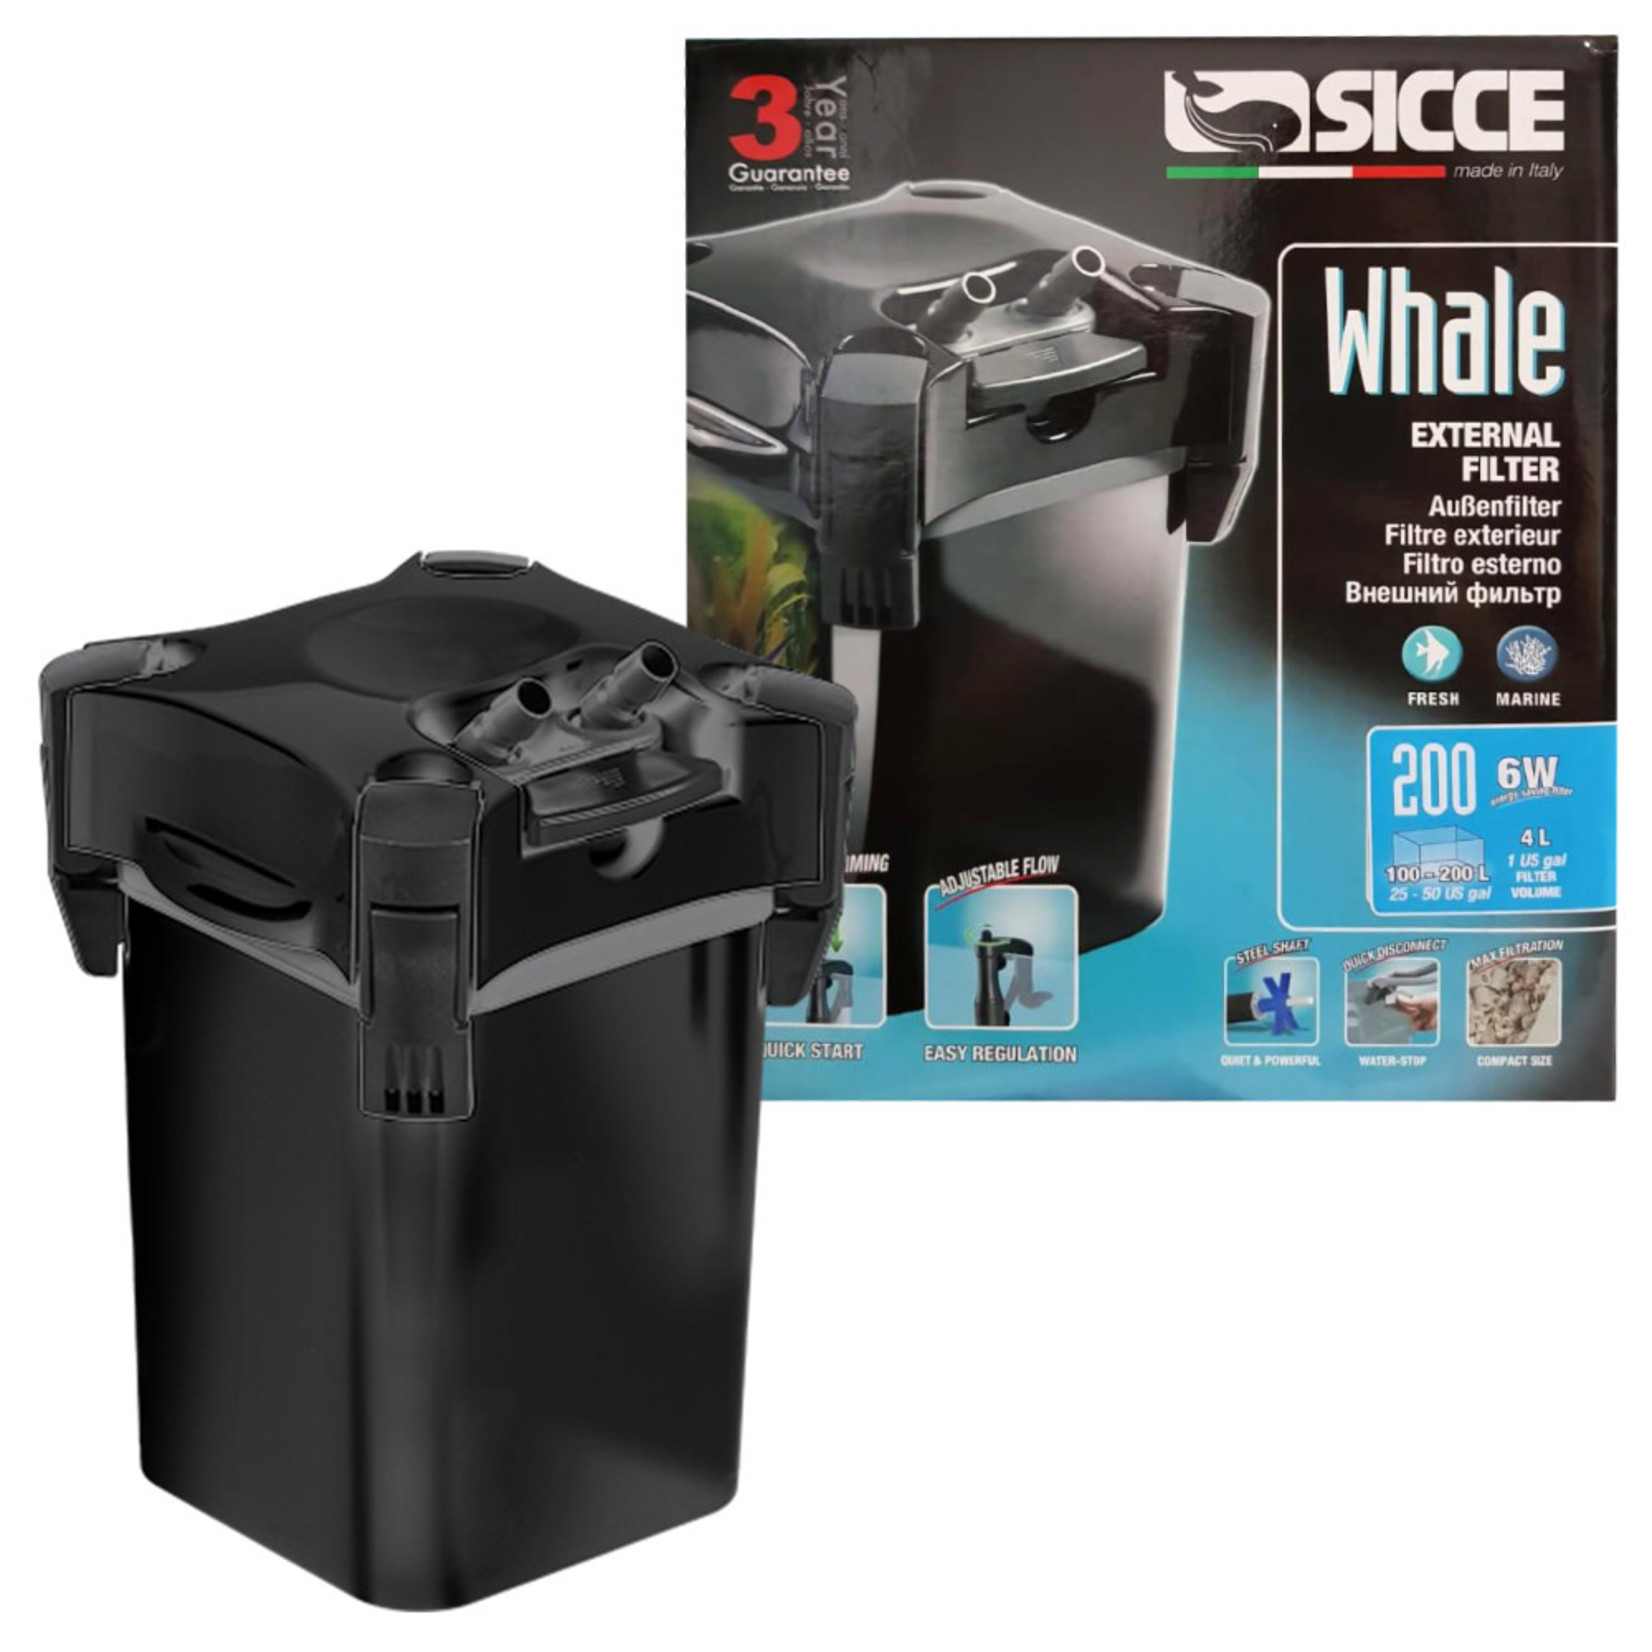 Sicce Whale 200 Canister Filter